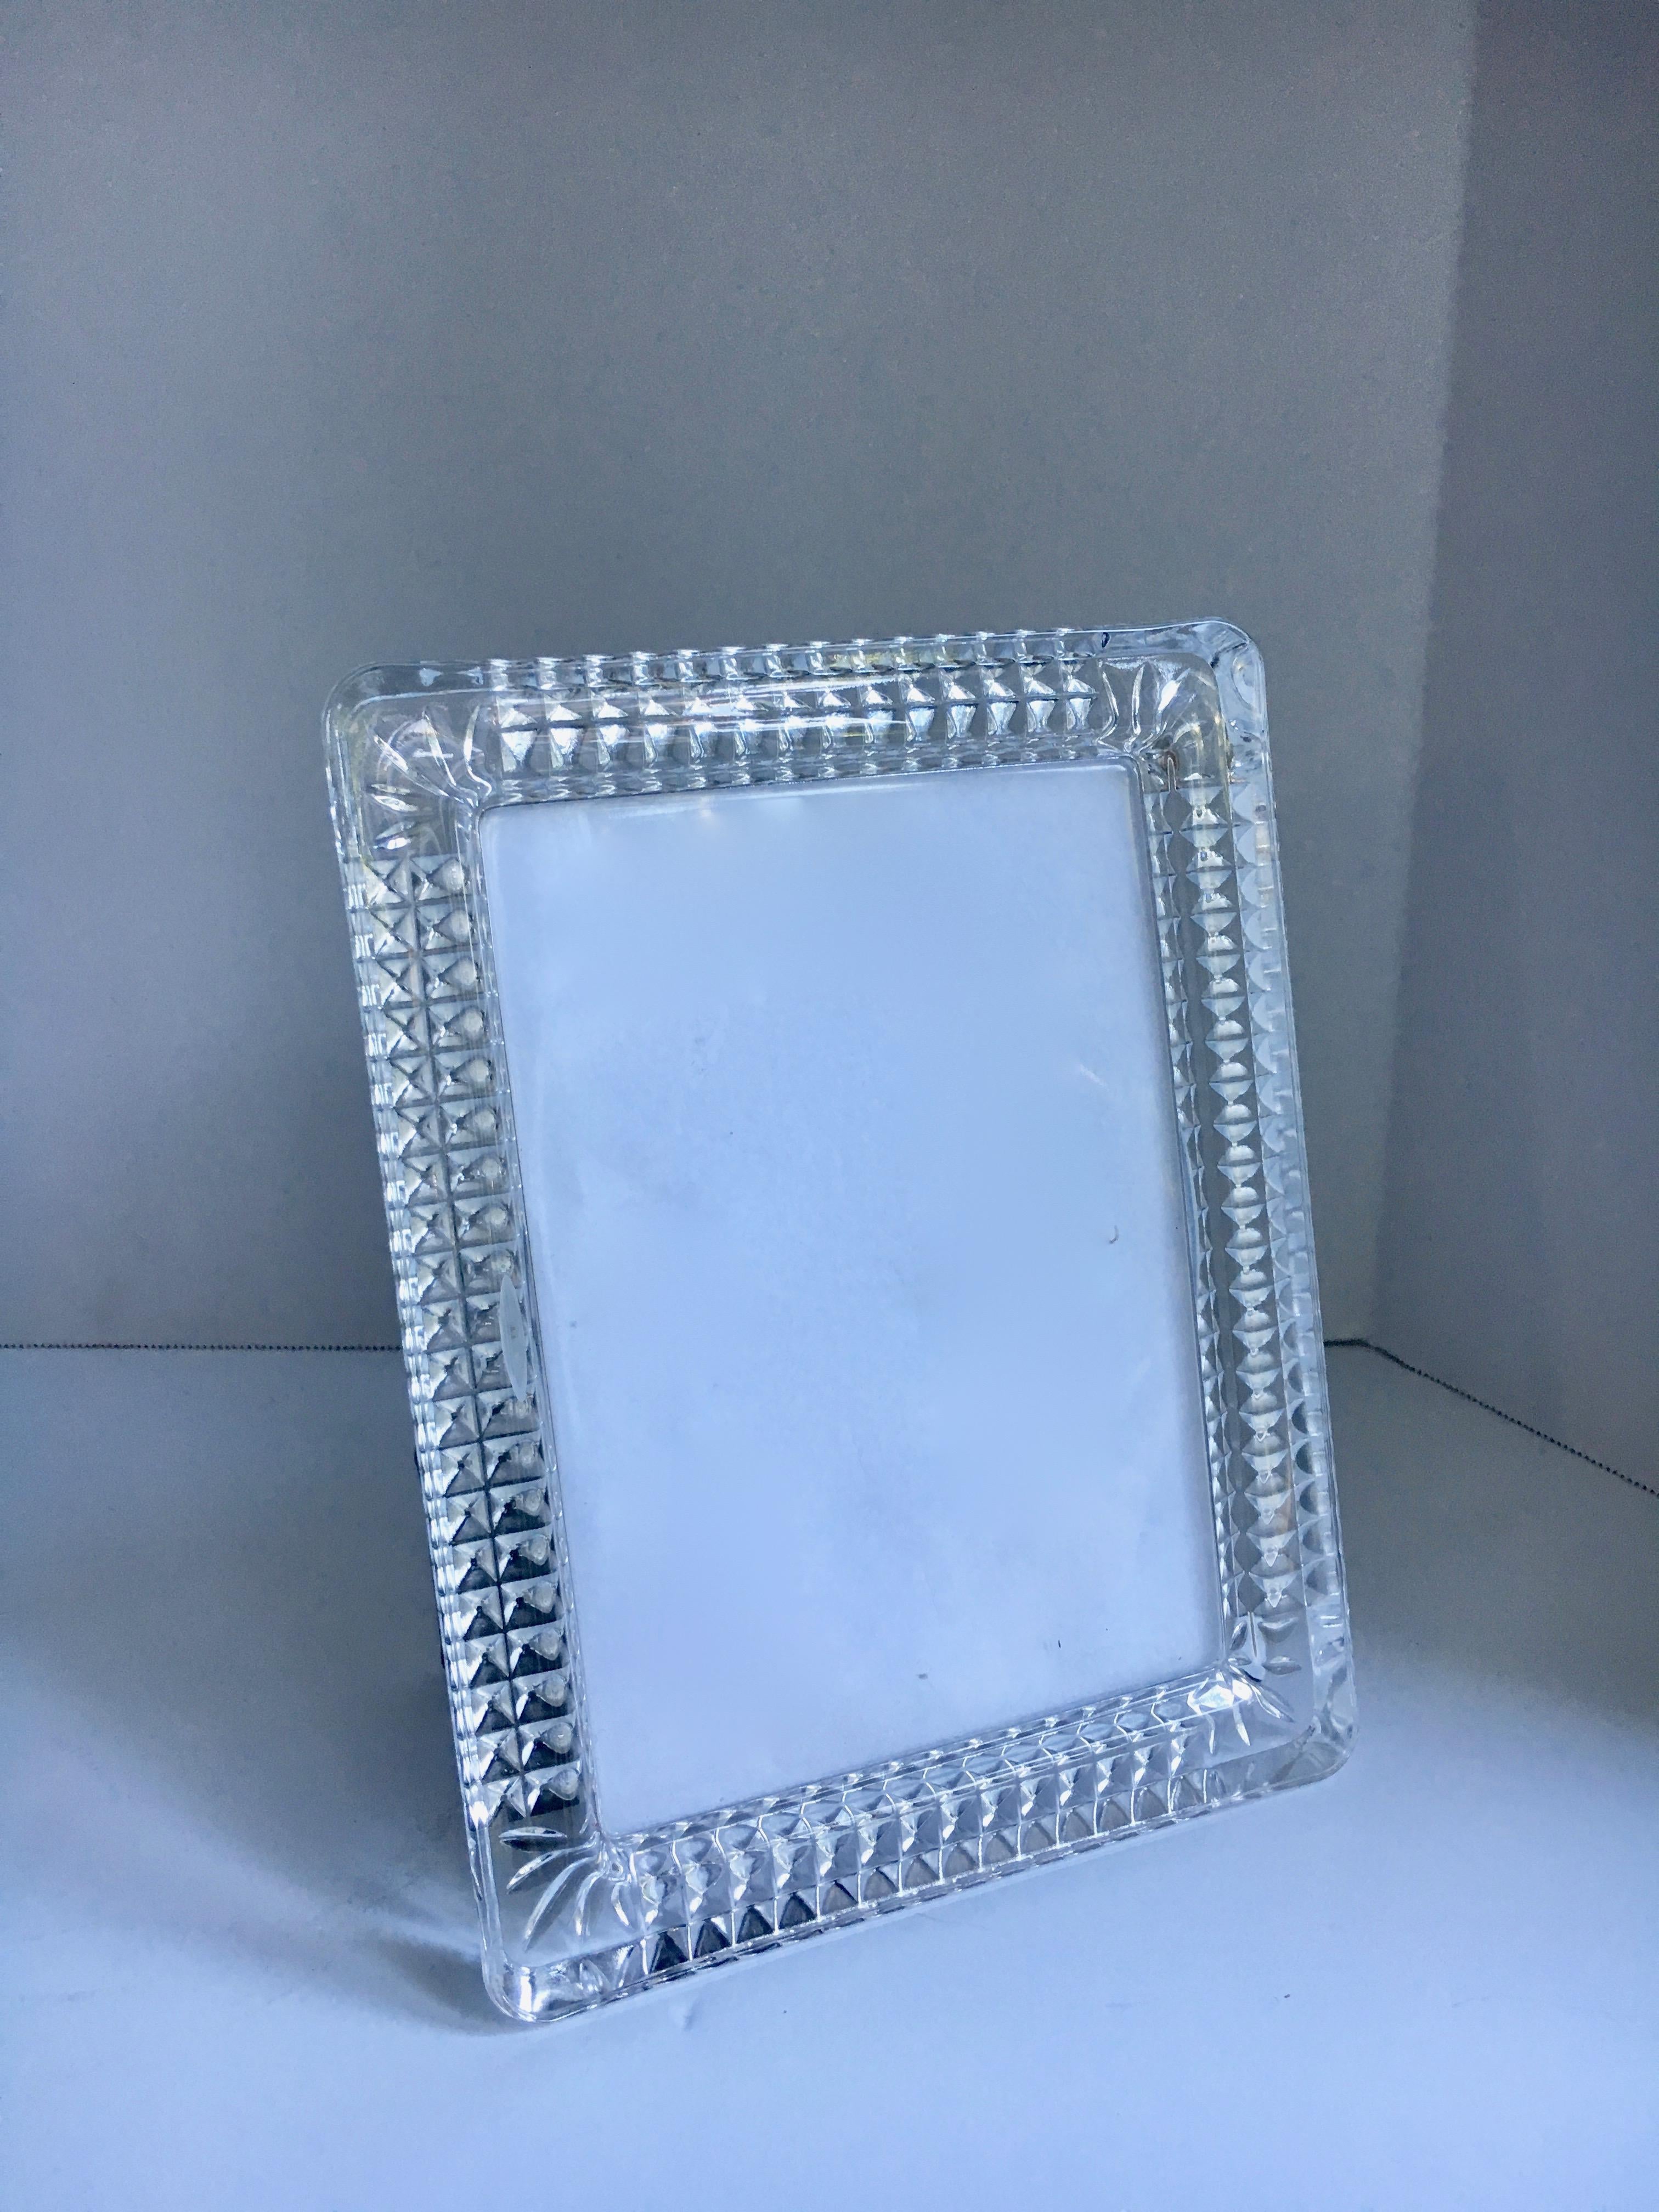 Cut crystal Rosenthal picture frame - Crystal cut in the rear perimeter, with beautiful architectural design shining through, the glass covering the photo is molded into the frame and not a separate piece of glass. Unique and faceted.
The stand in